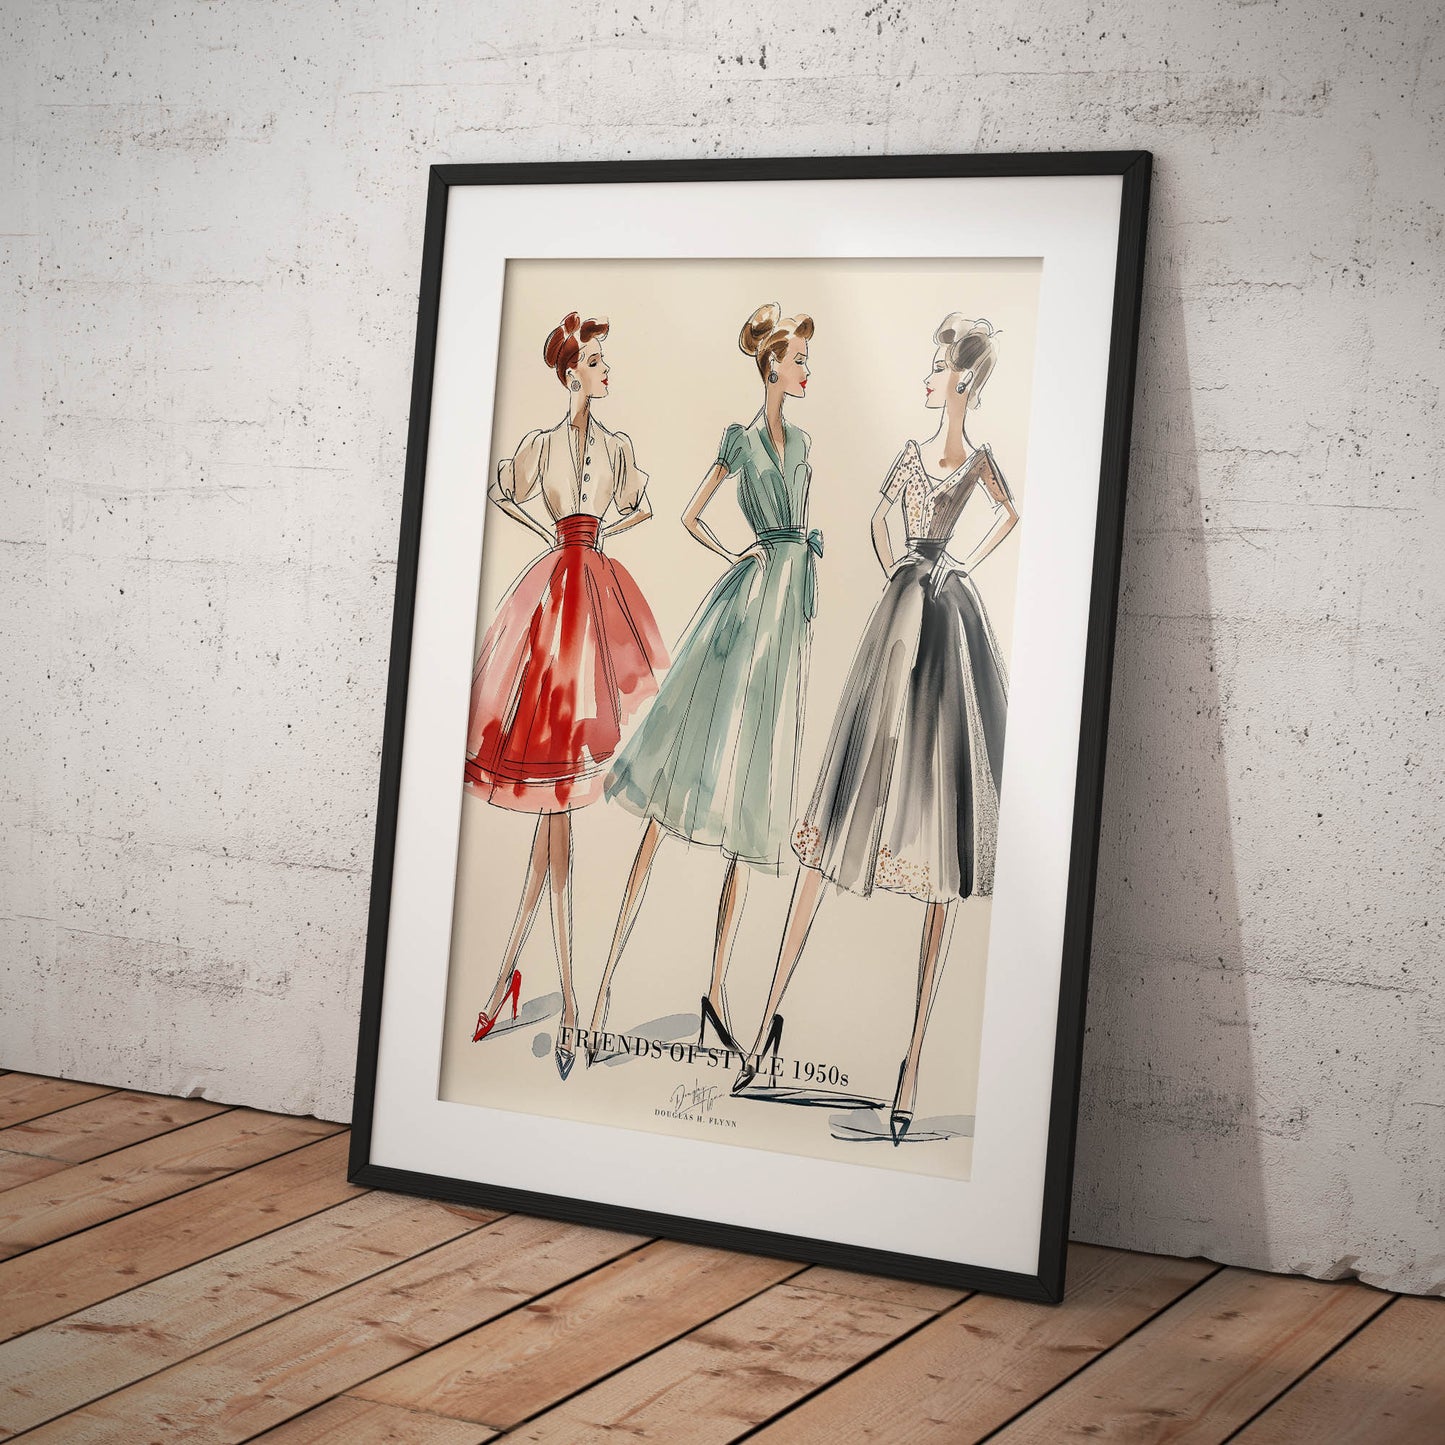 »Friends of Style 1950s«